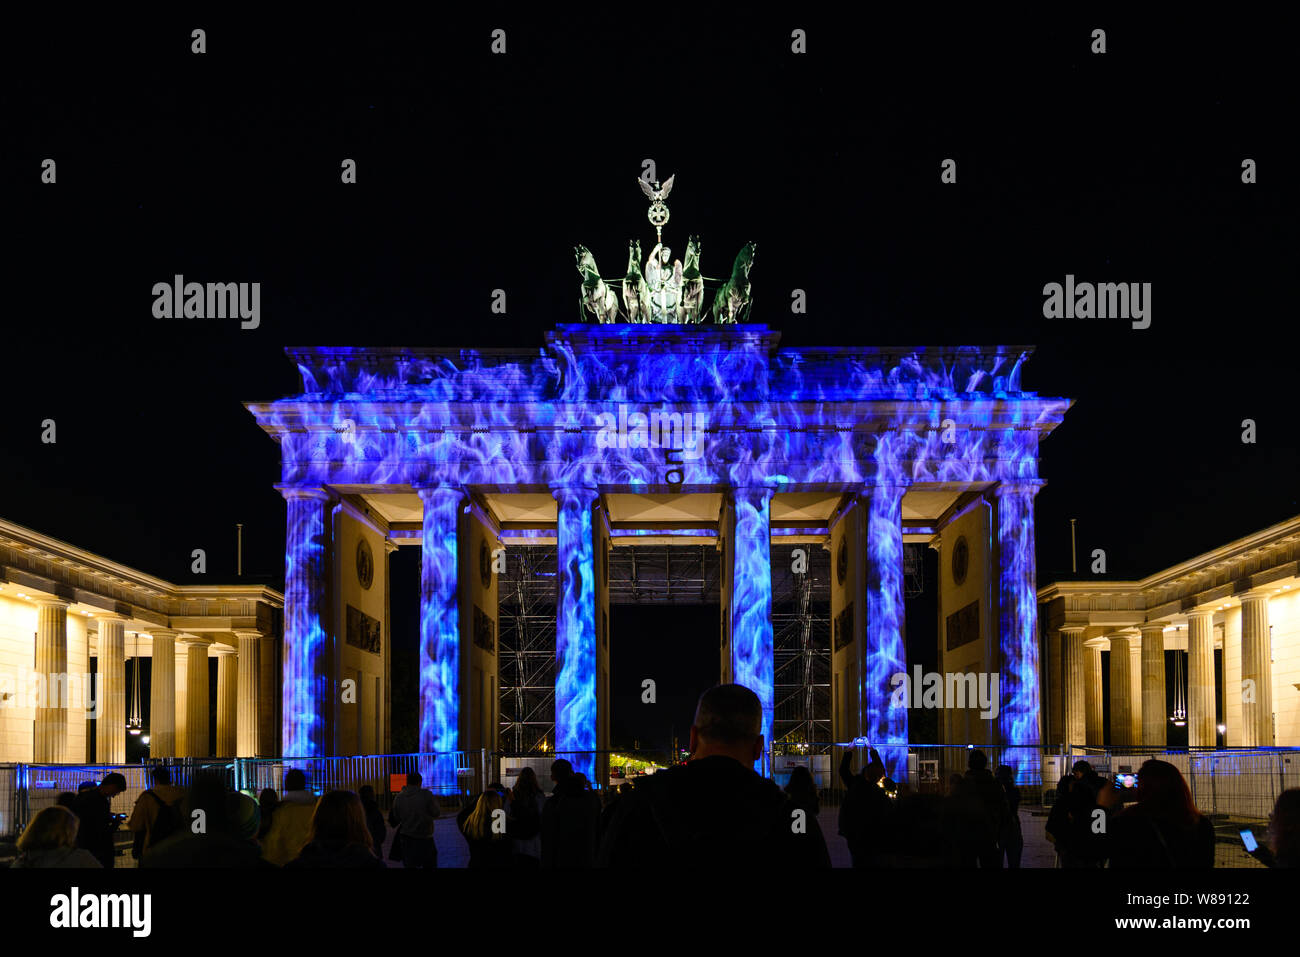 People enjoy event Festival of Lights, Berlin leuchtet, the projection mapping lighting art at Brandenburg Gate during the night. Stock Photo